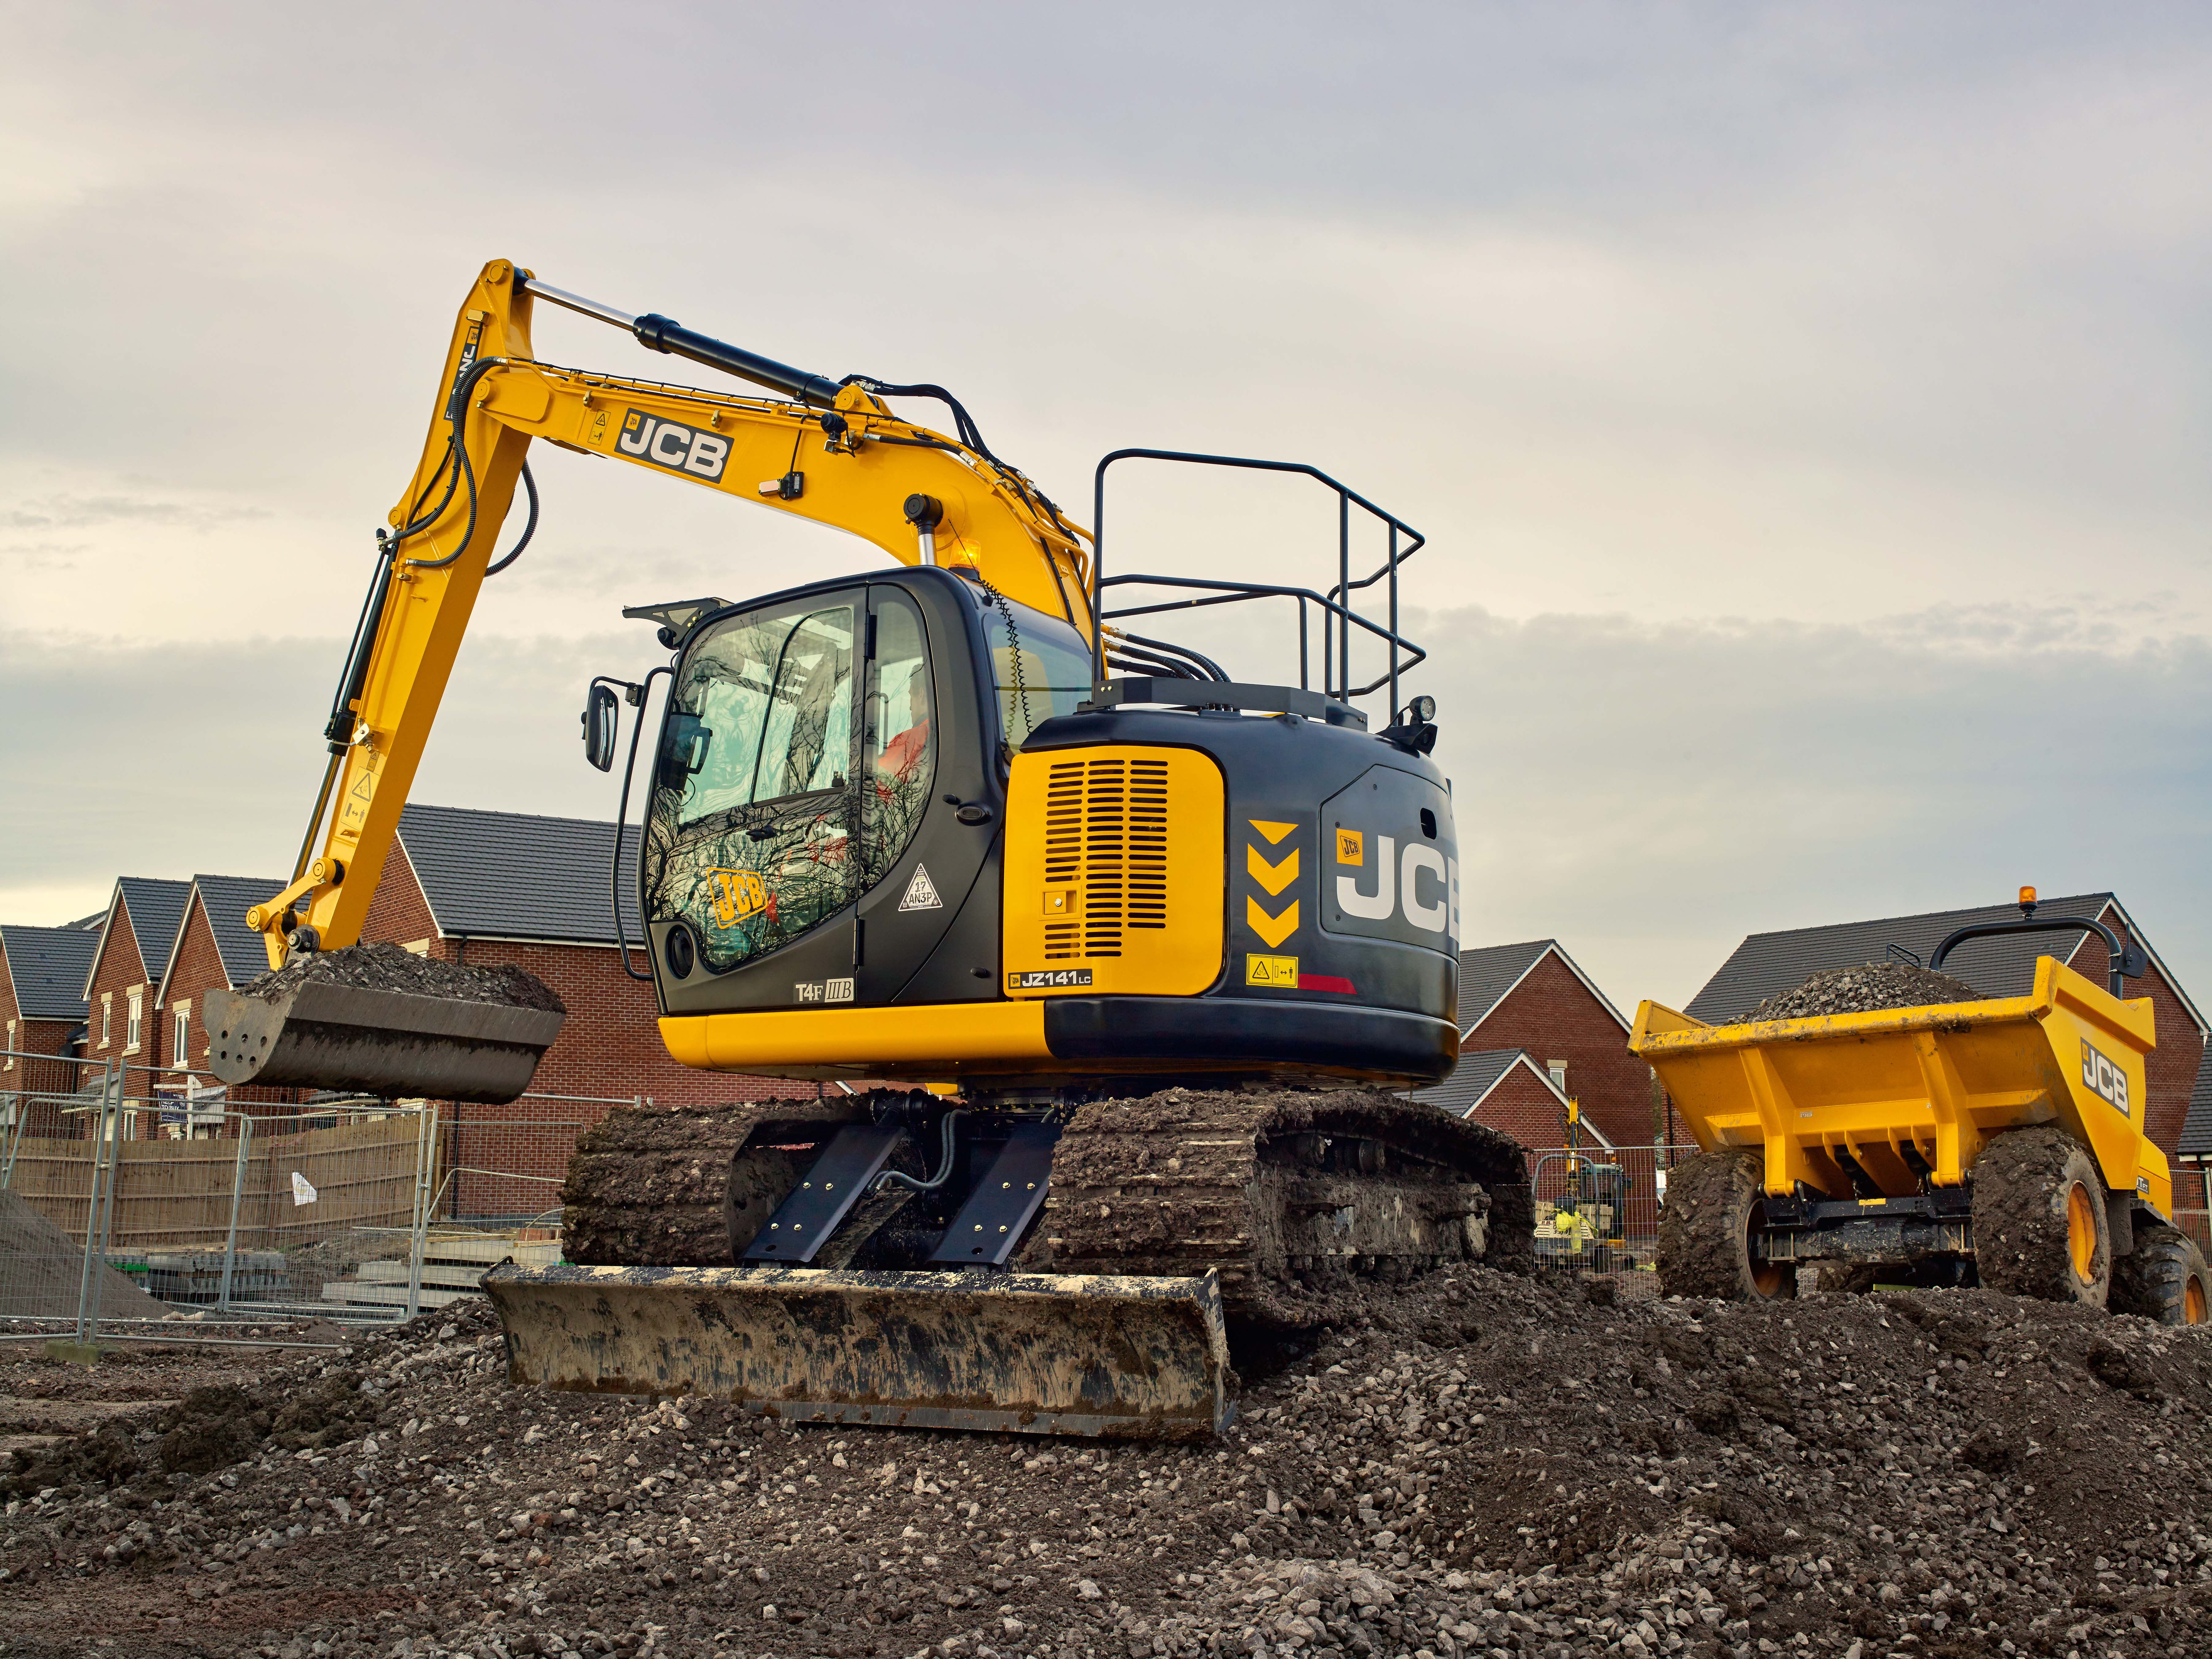 JCB reduced tailswing